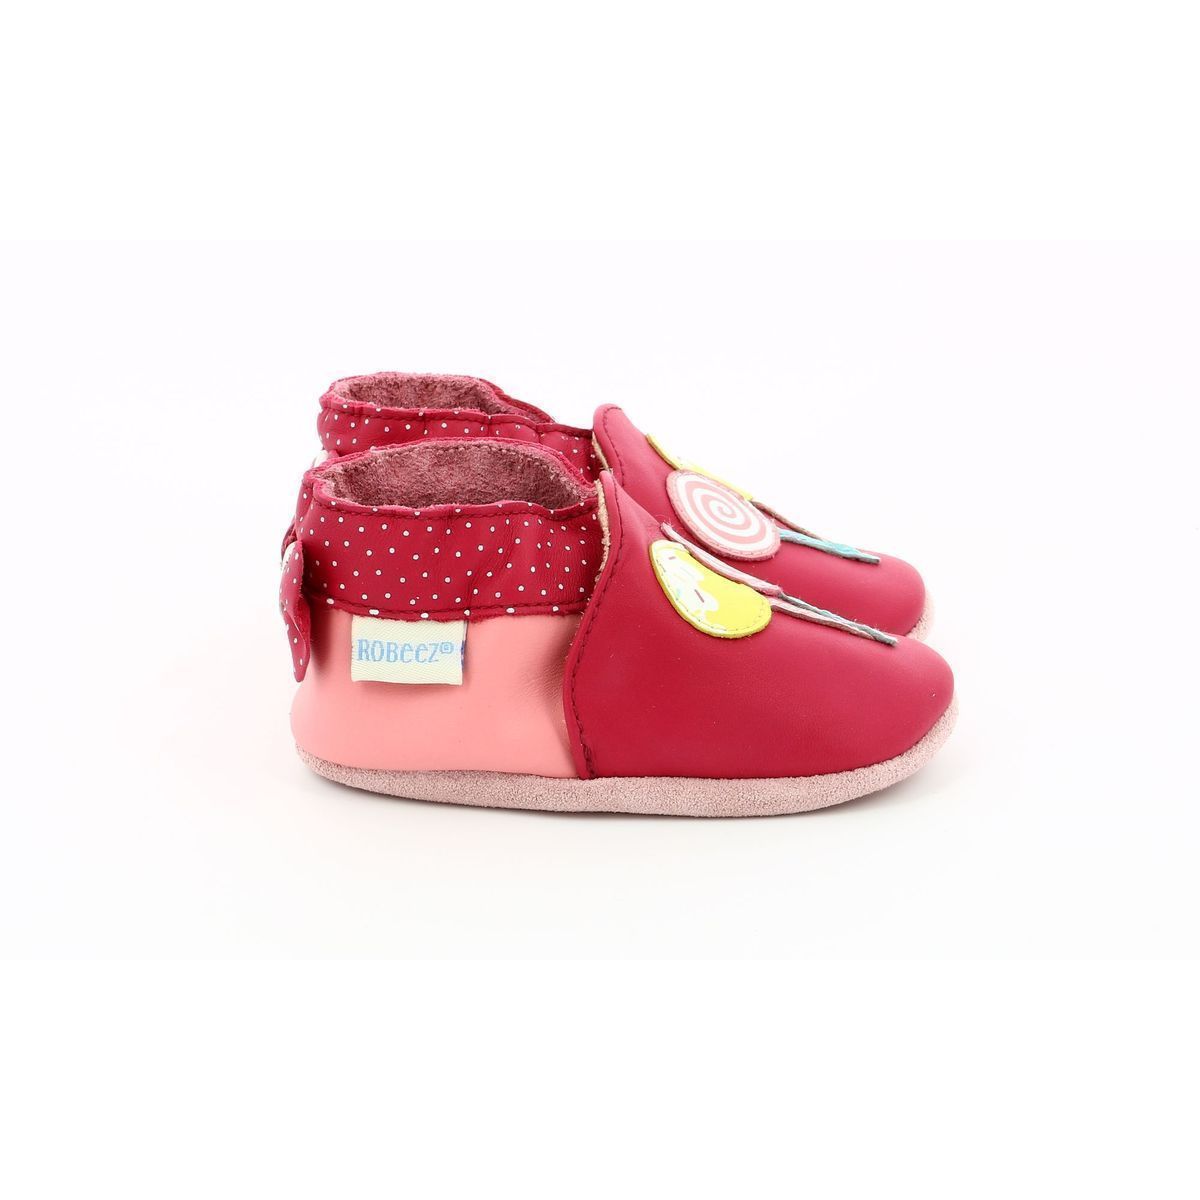 Chaussons cuir dancing mouse Robeez blanc/rose